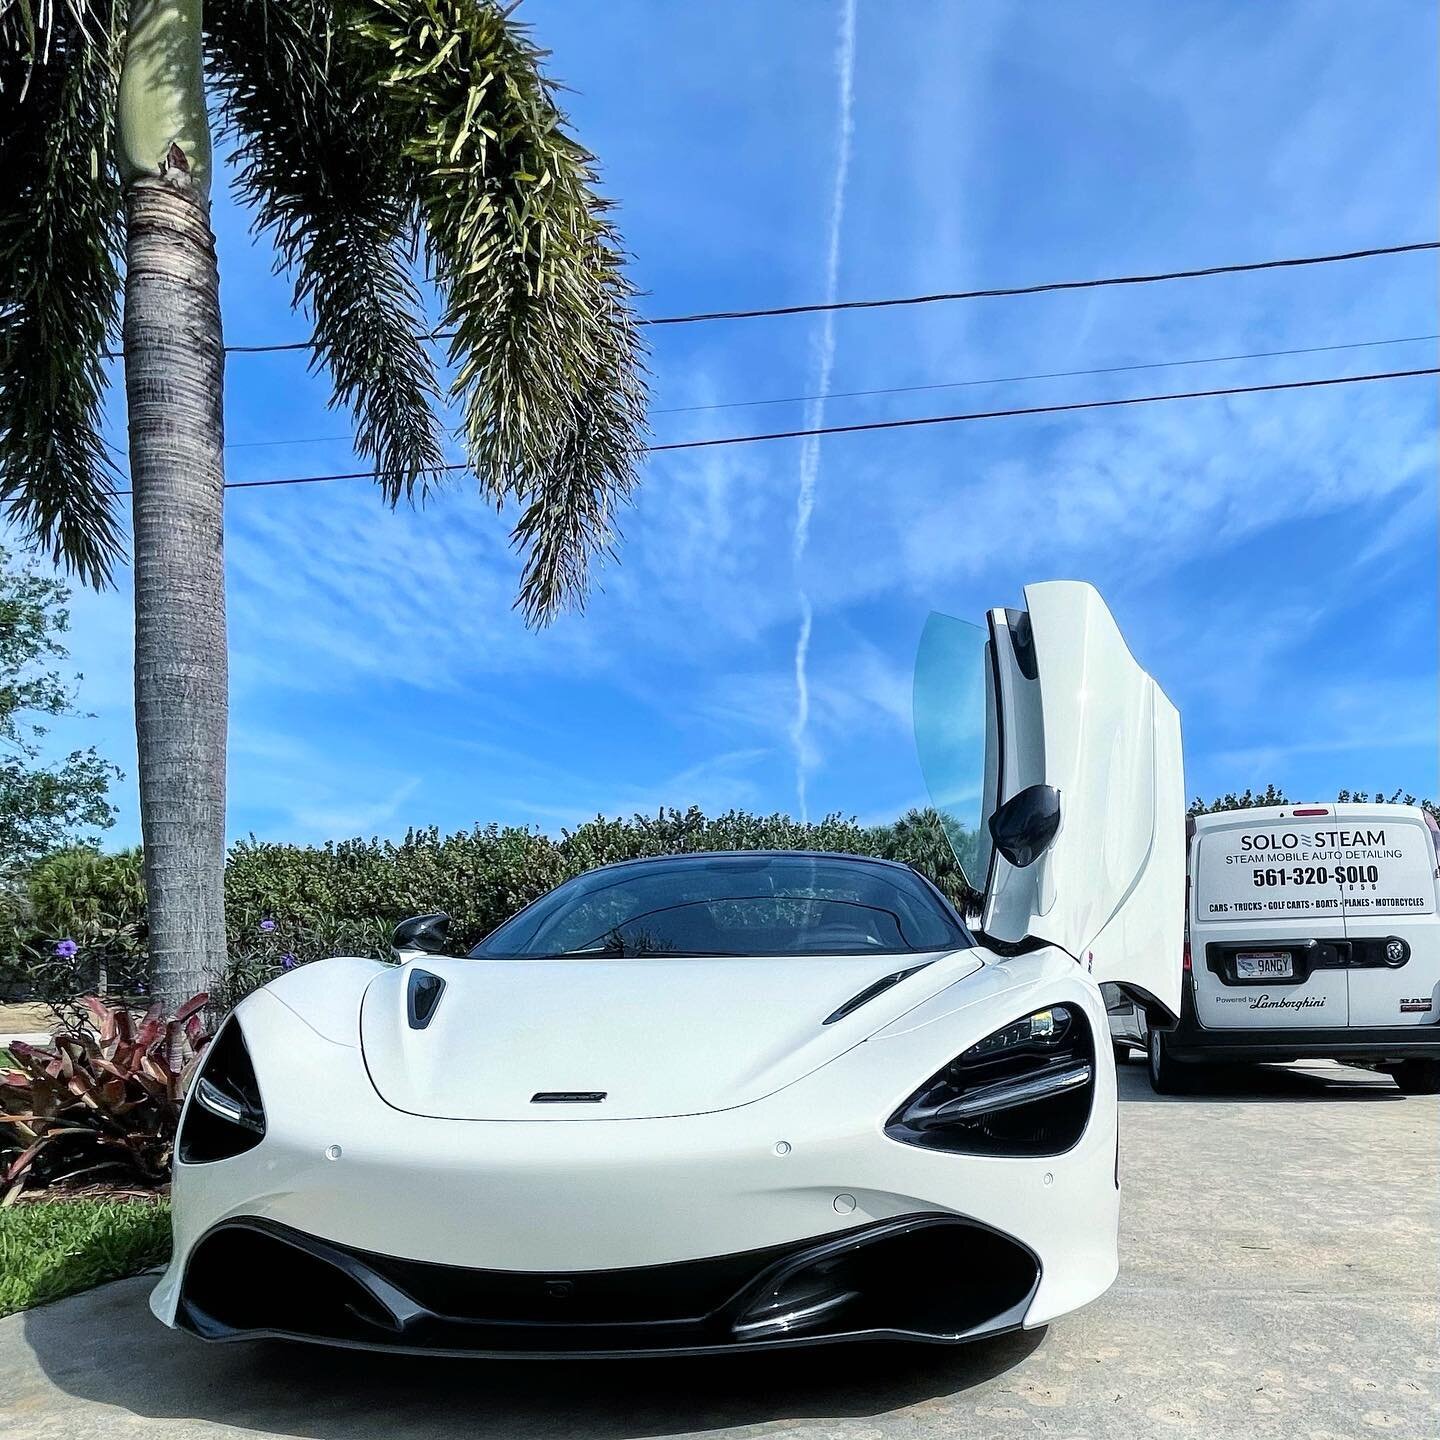 #McLaren720S 
Engine: Twin-turbocharged 4.0-litre V8 engine. 
0-60 mph: 2.8 seconds. 
Top Speed: 212 mph.
Only 500 have been made 
What do you think about this beast ? 
#solosteam